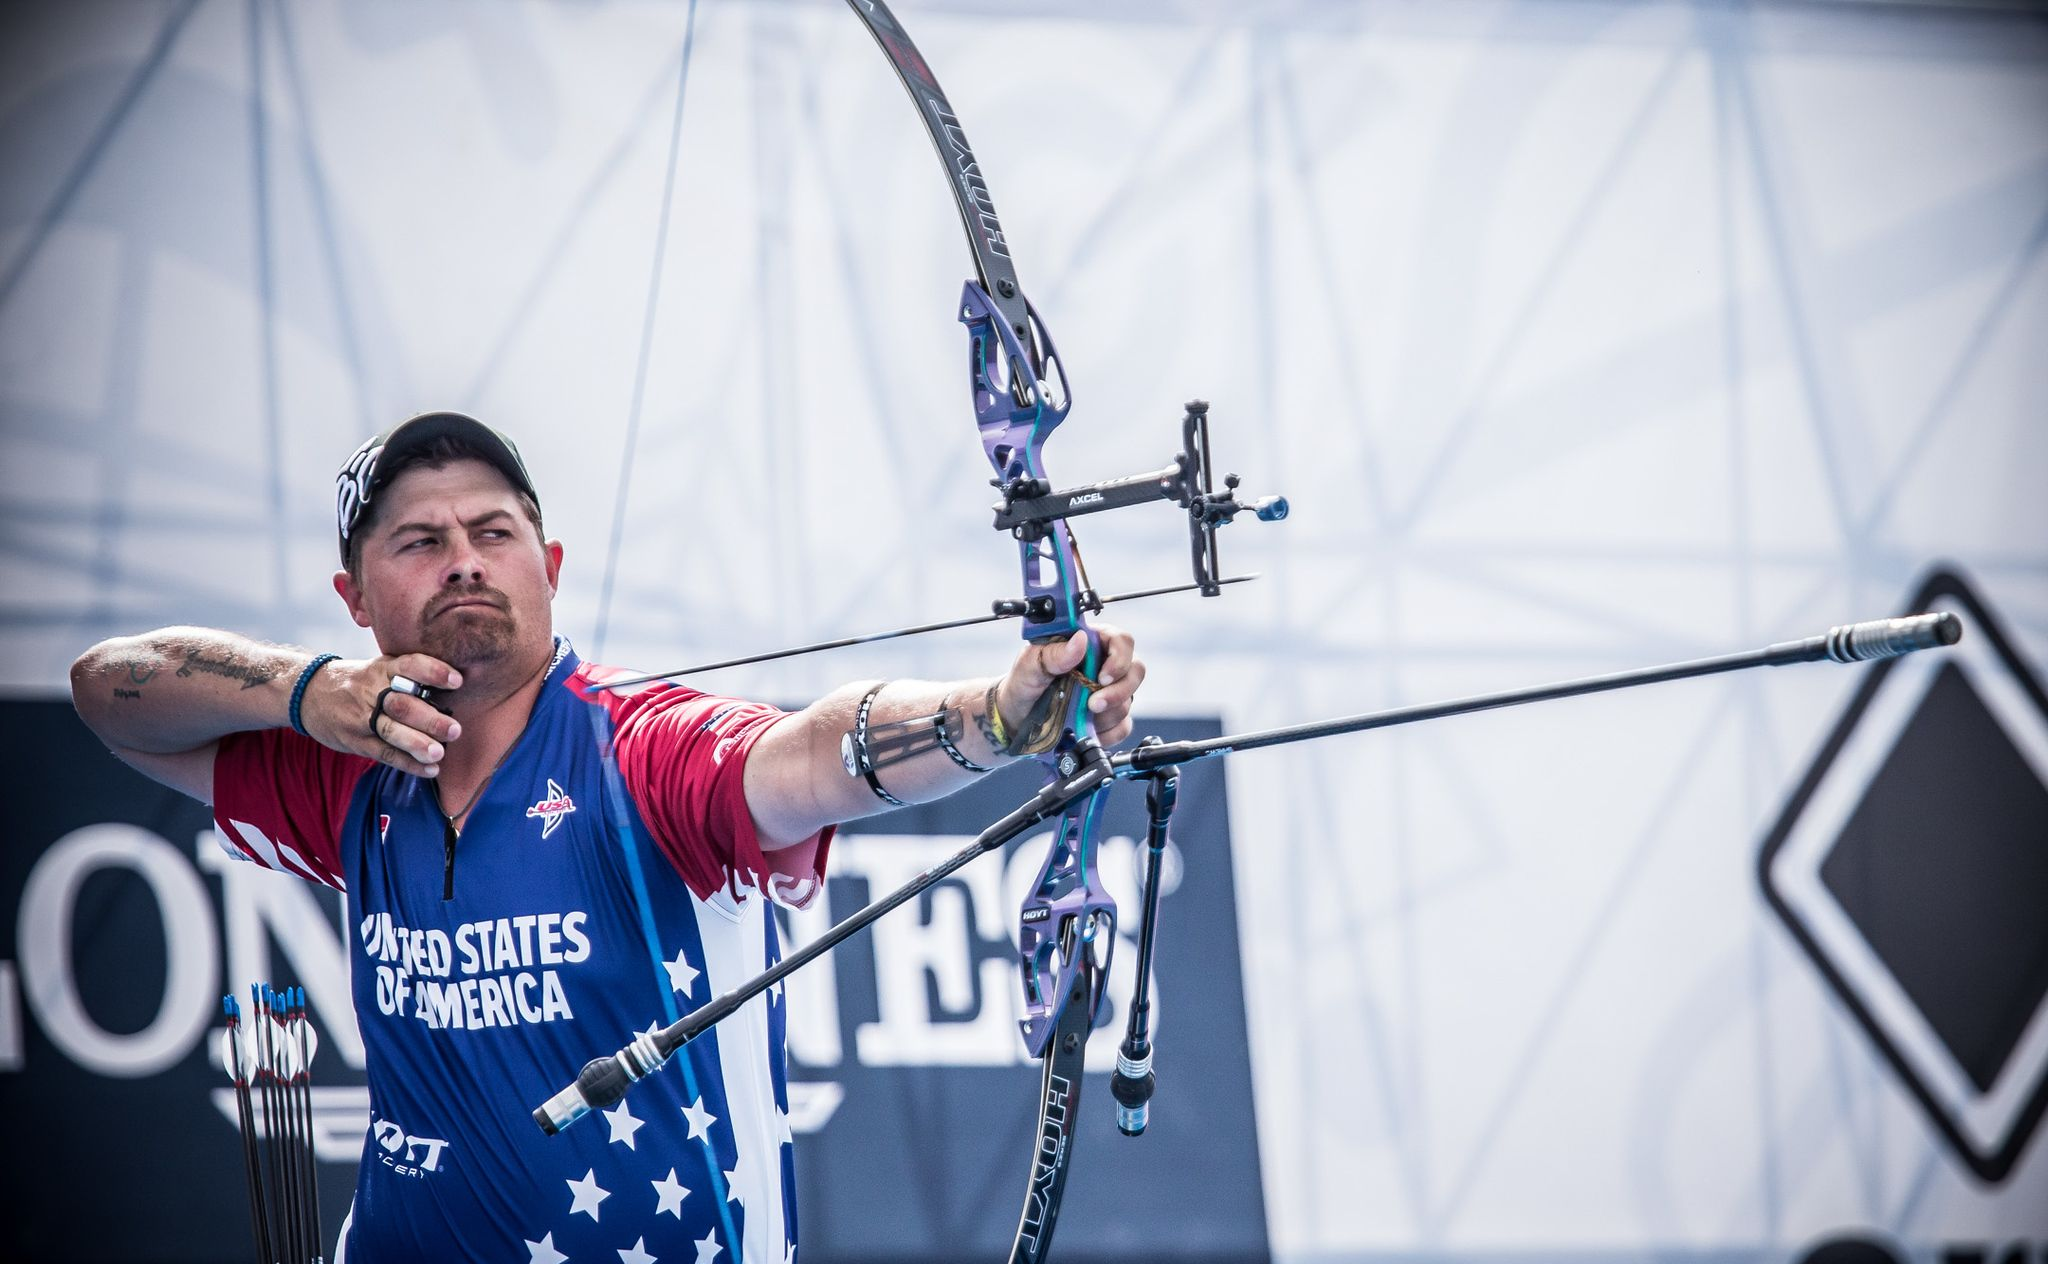 Ellison returns to top of Archery World Cup podium while South Korea dominate recurve finals in Medellin